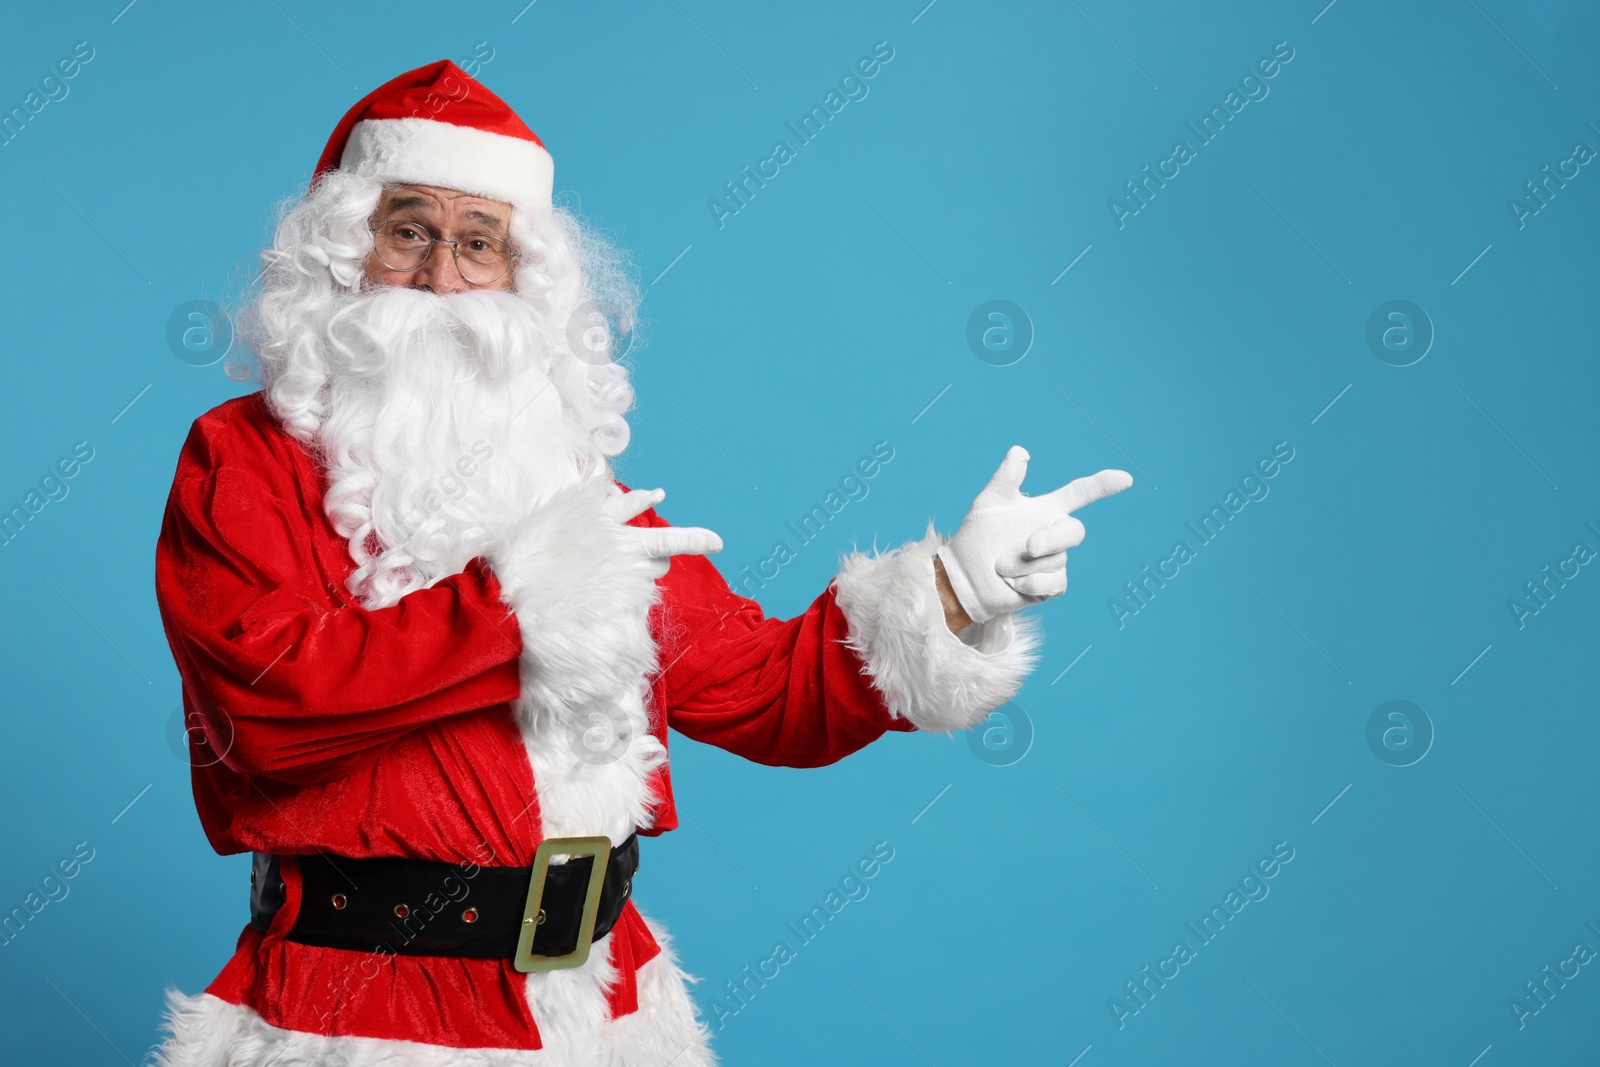 Photo of Merry Christmas. Santa Claus pointing at something on light blue background, space for text